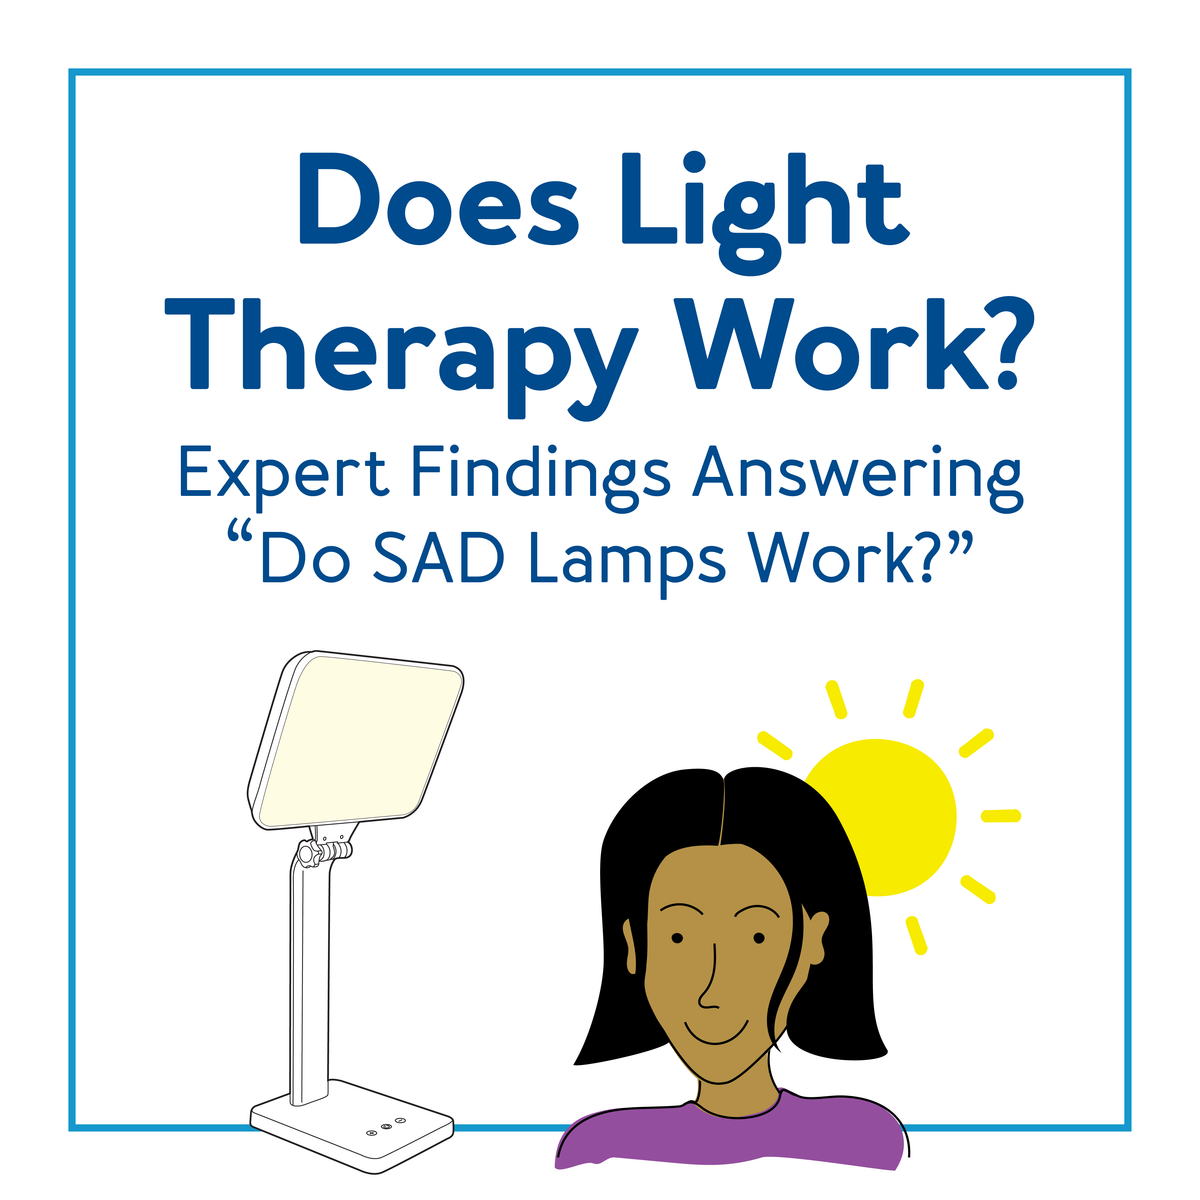 Graphic Woman with Therapy Lamp Does light therapy work? Expert Findings Answering Do SAD lamps work?